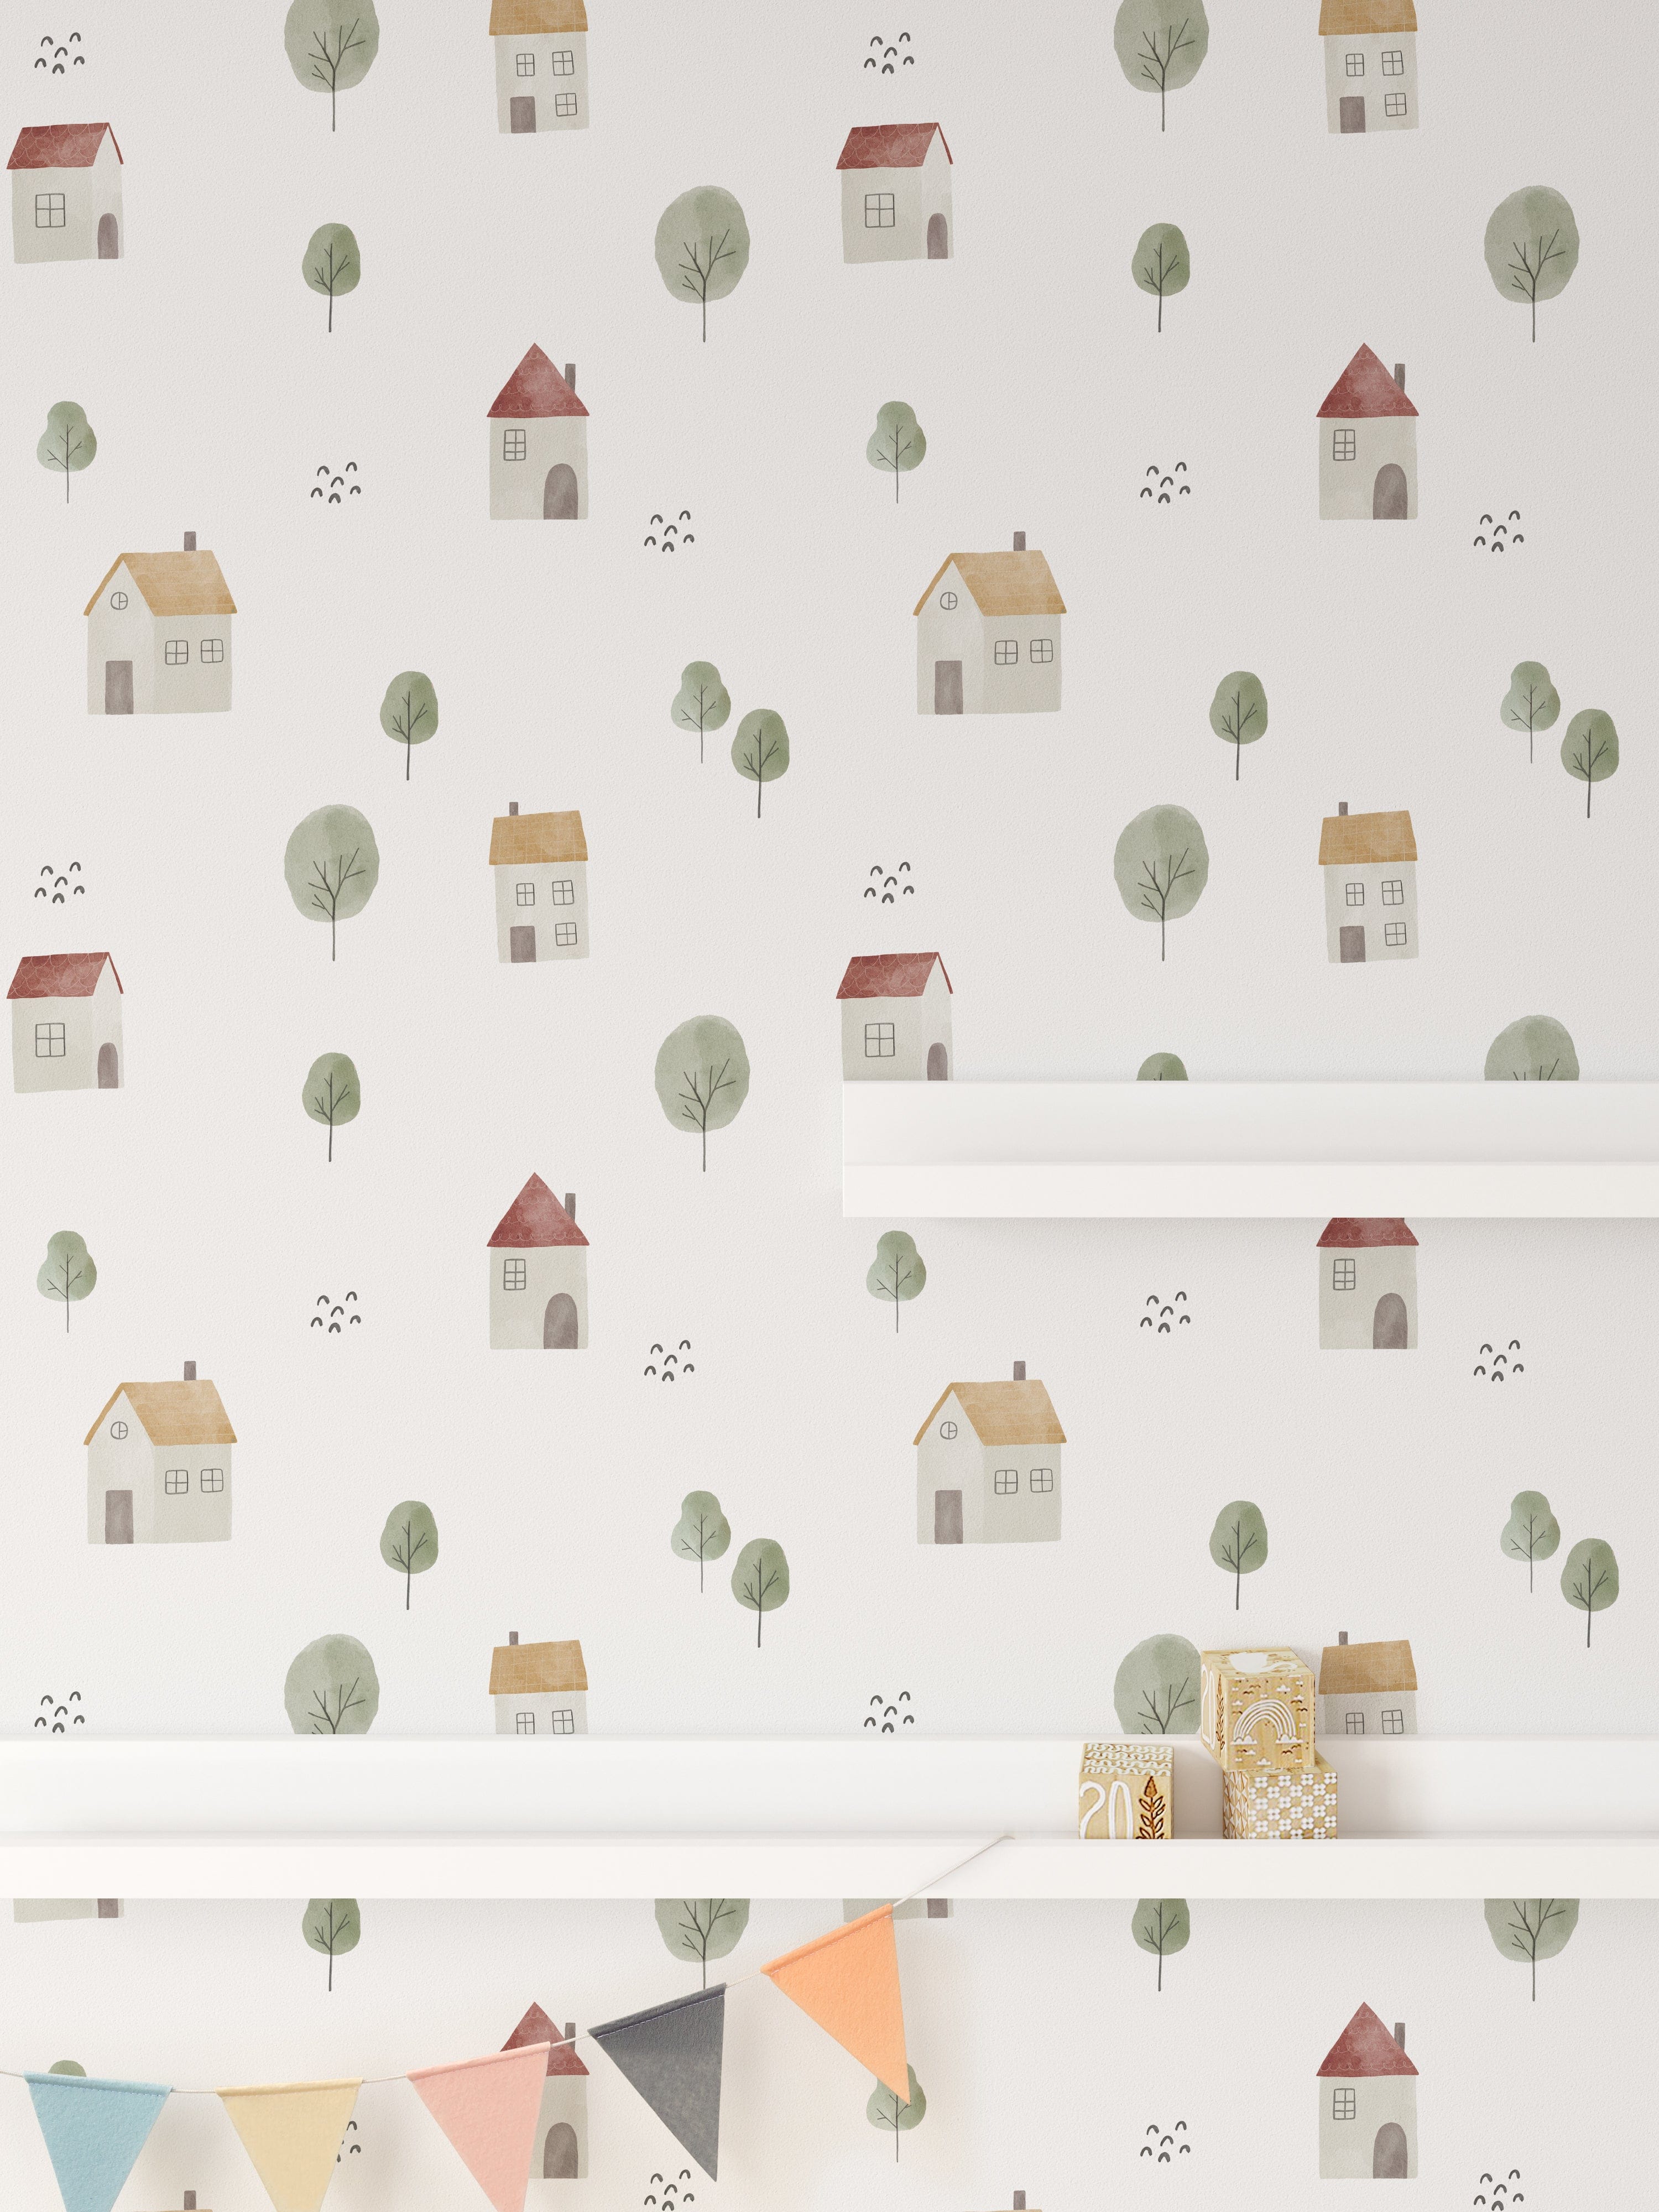 A section of a wall decorated with Farm Friend Wallpaper - Happy House, featuring charming houses and trees, along with a white shelf and colorful pennant banner, adding a cheerful touch to a child's room.